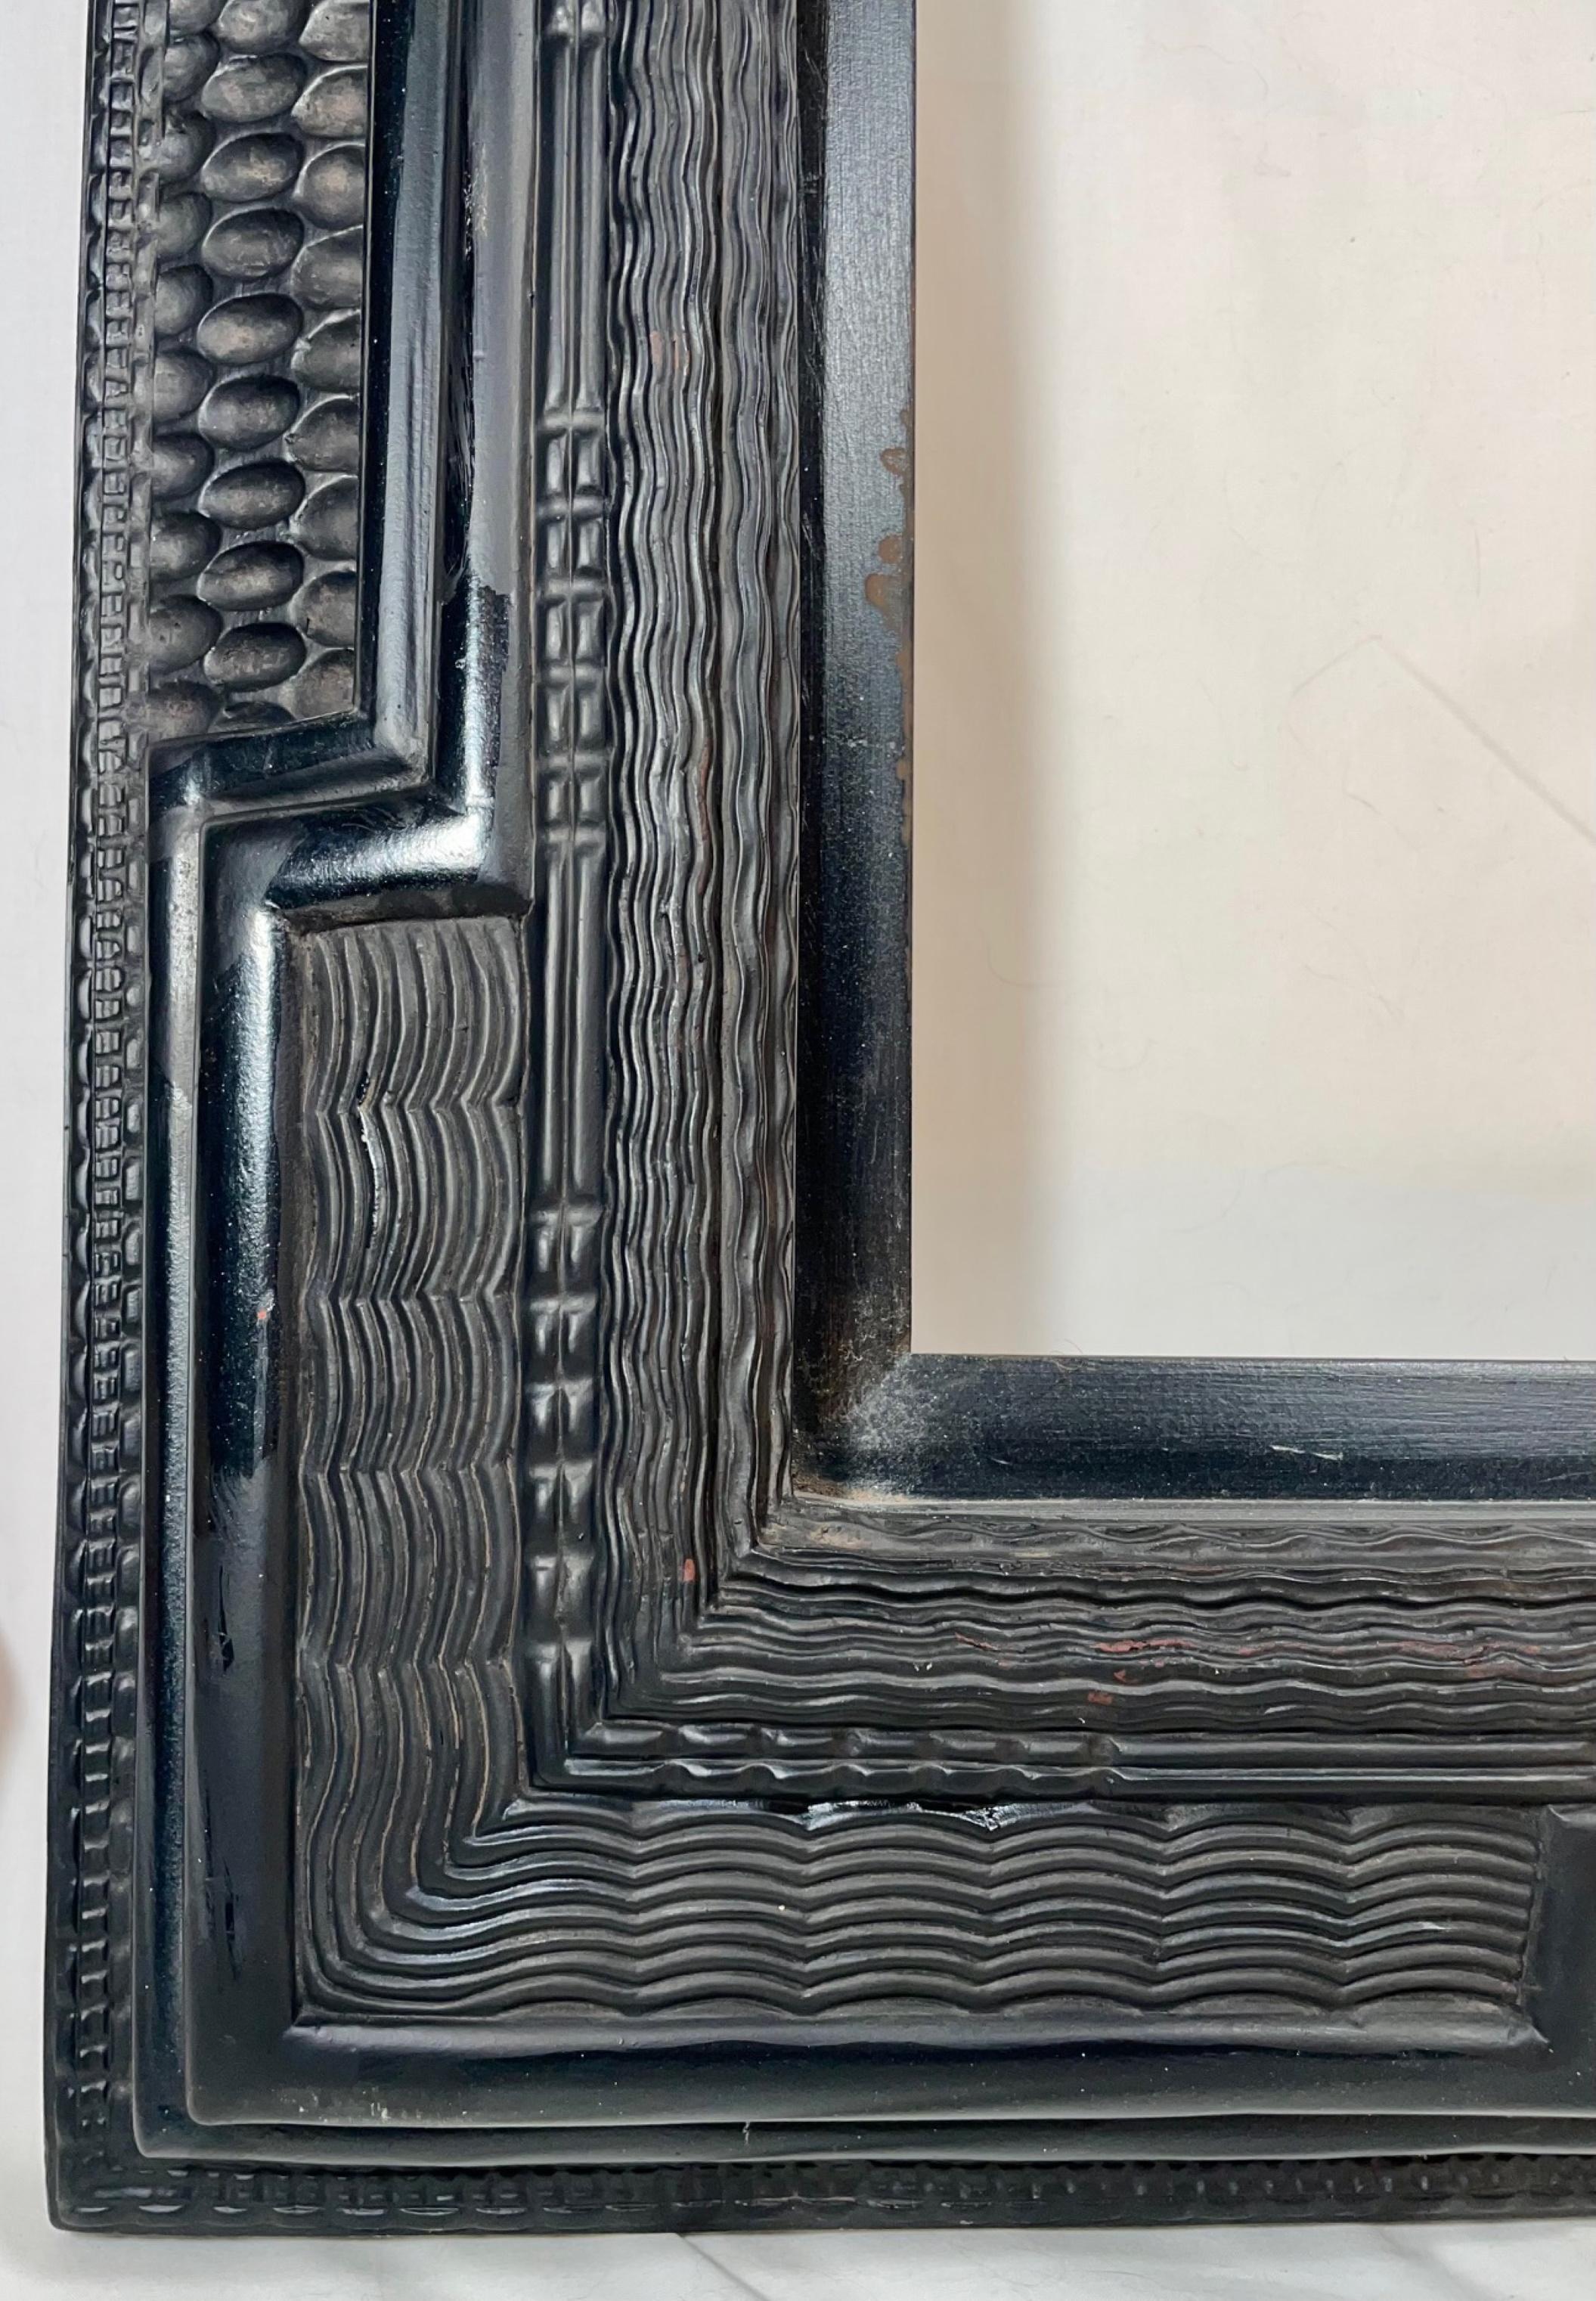 Dutch Ebonized Ripple Moulded Picture Frame Early 20th Century.

Classic Dutch old master ebonized frame with multiple ripple moulding. The depth and detail is exceptional. The moulding is highlighted by a ripple panel pattern with a finish that